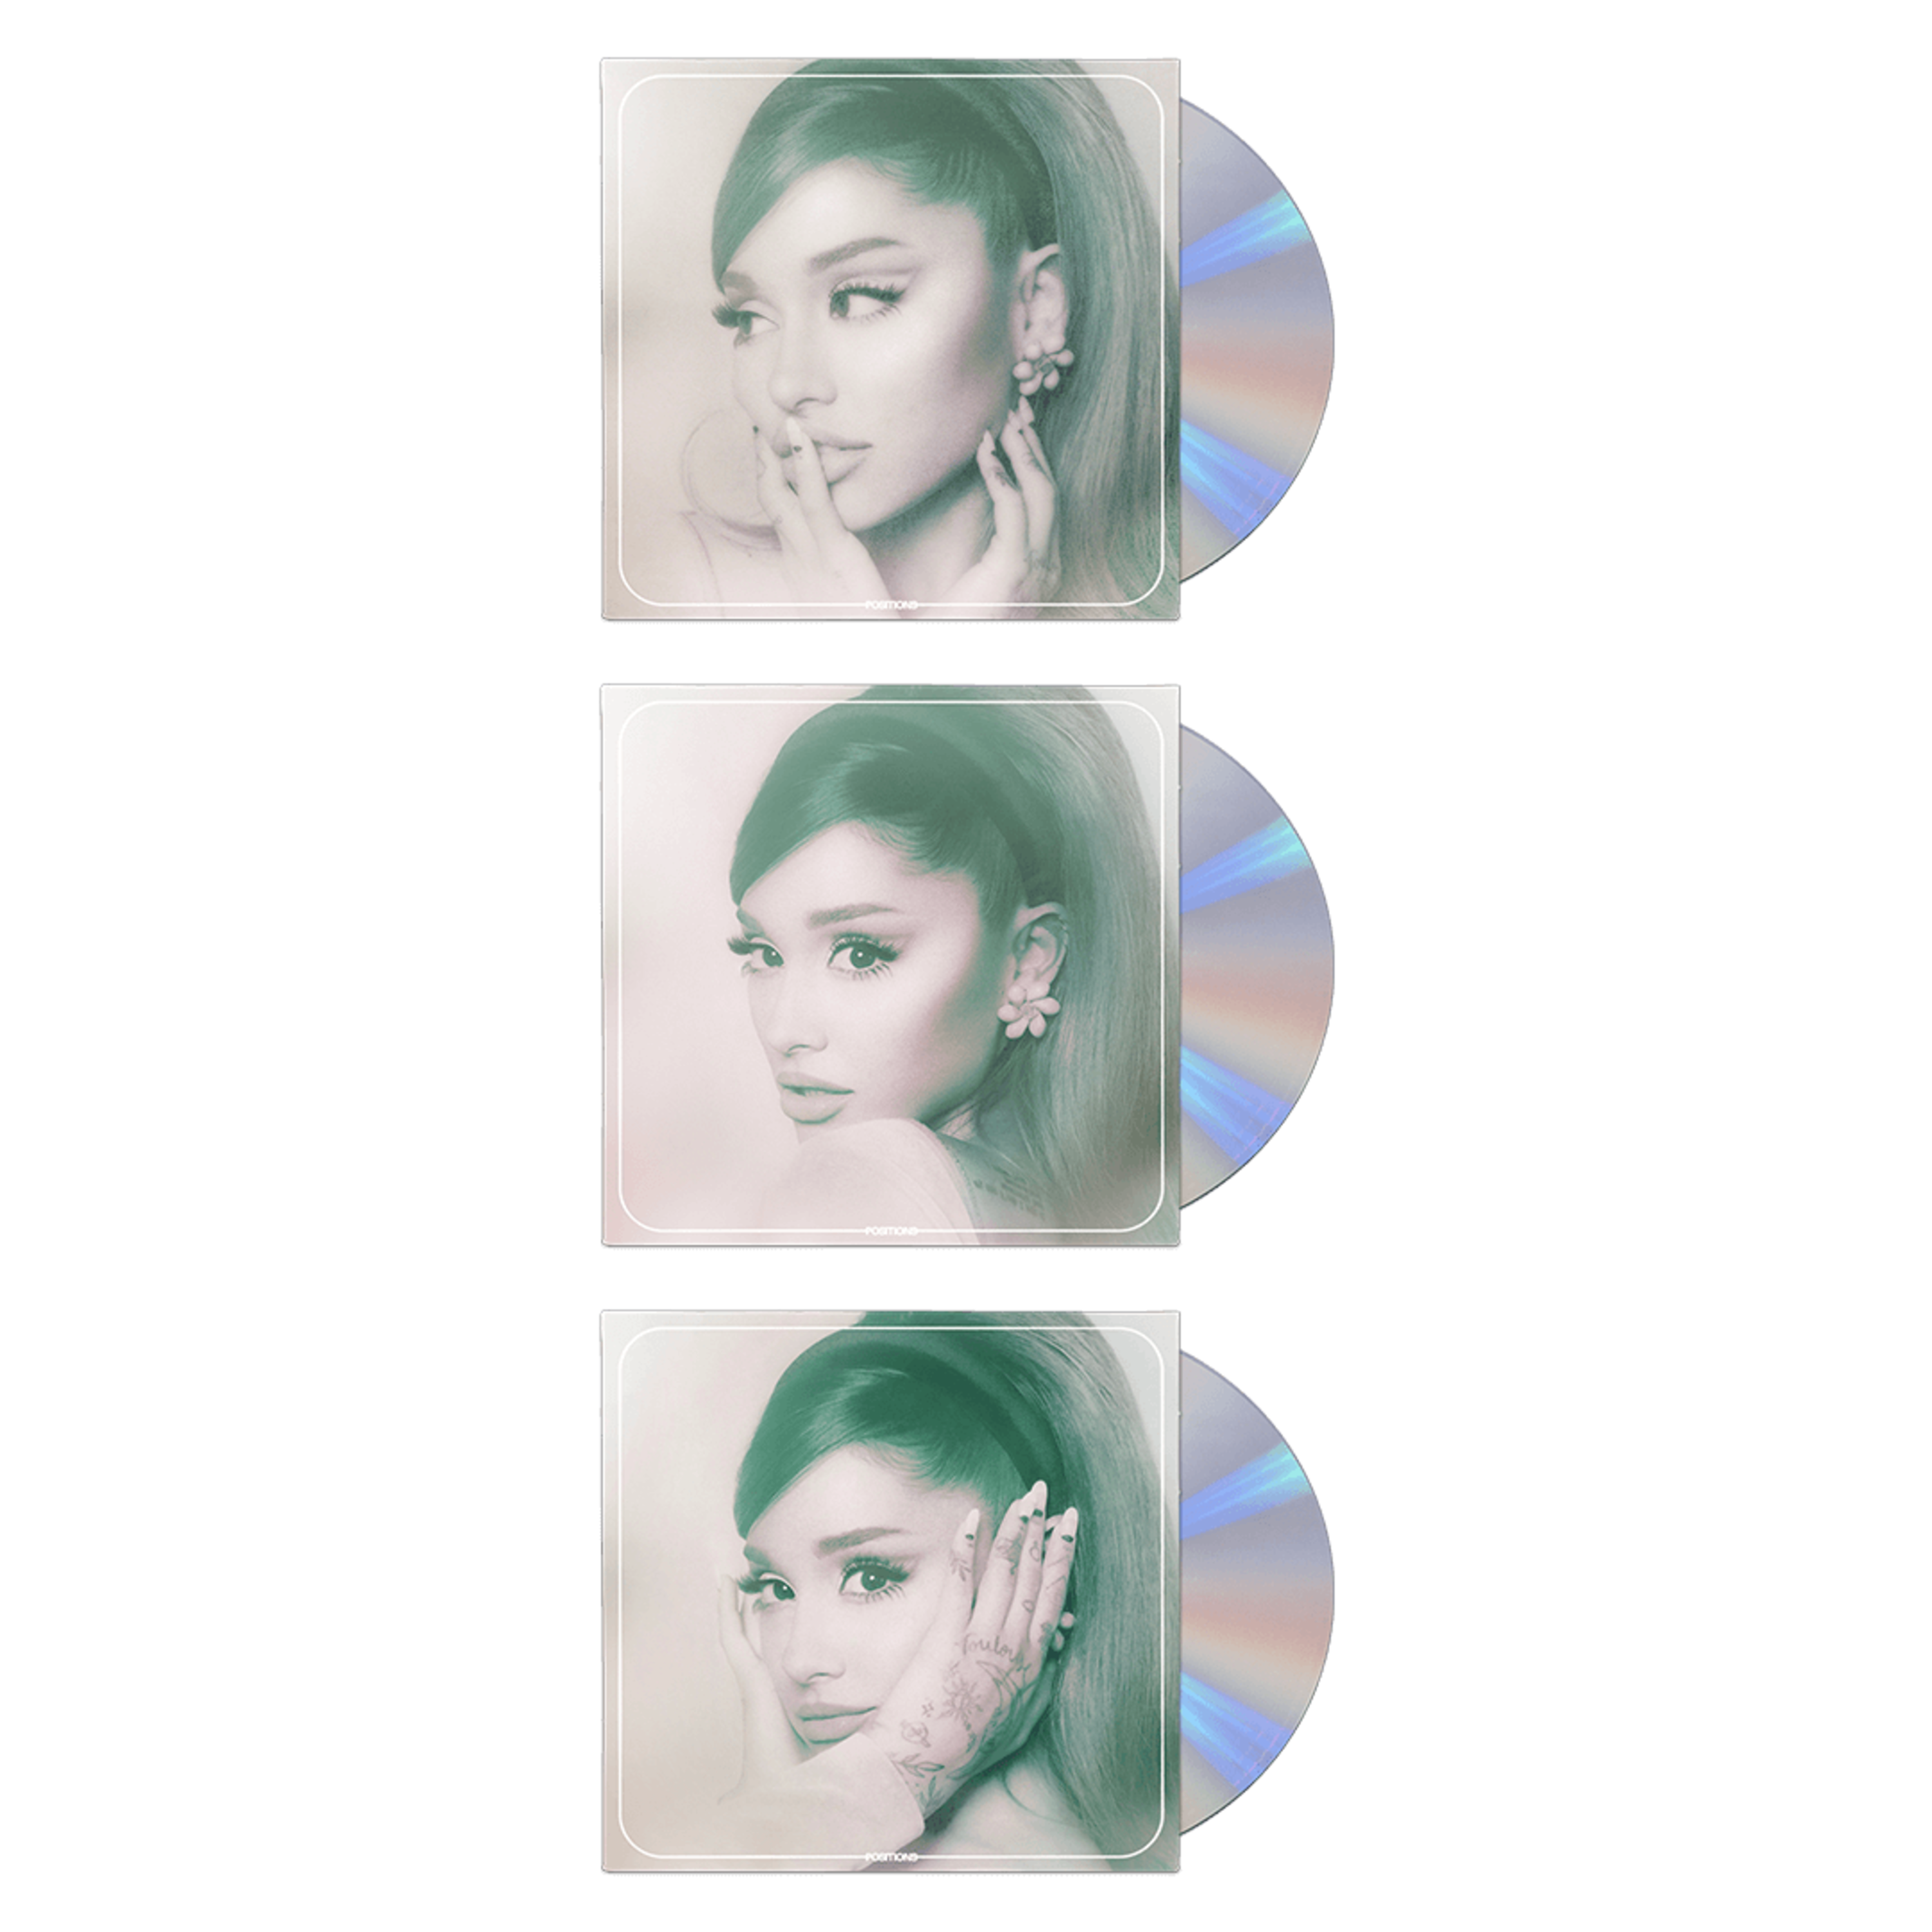 Universal Music Store - Positions (CD Collection Bundle) - Ariana Grande -  CD Bundle